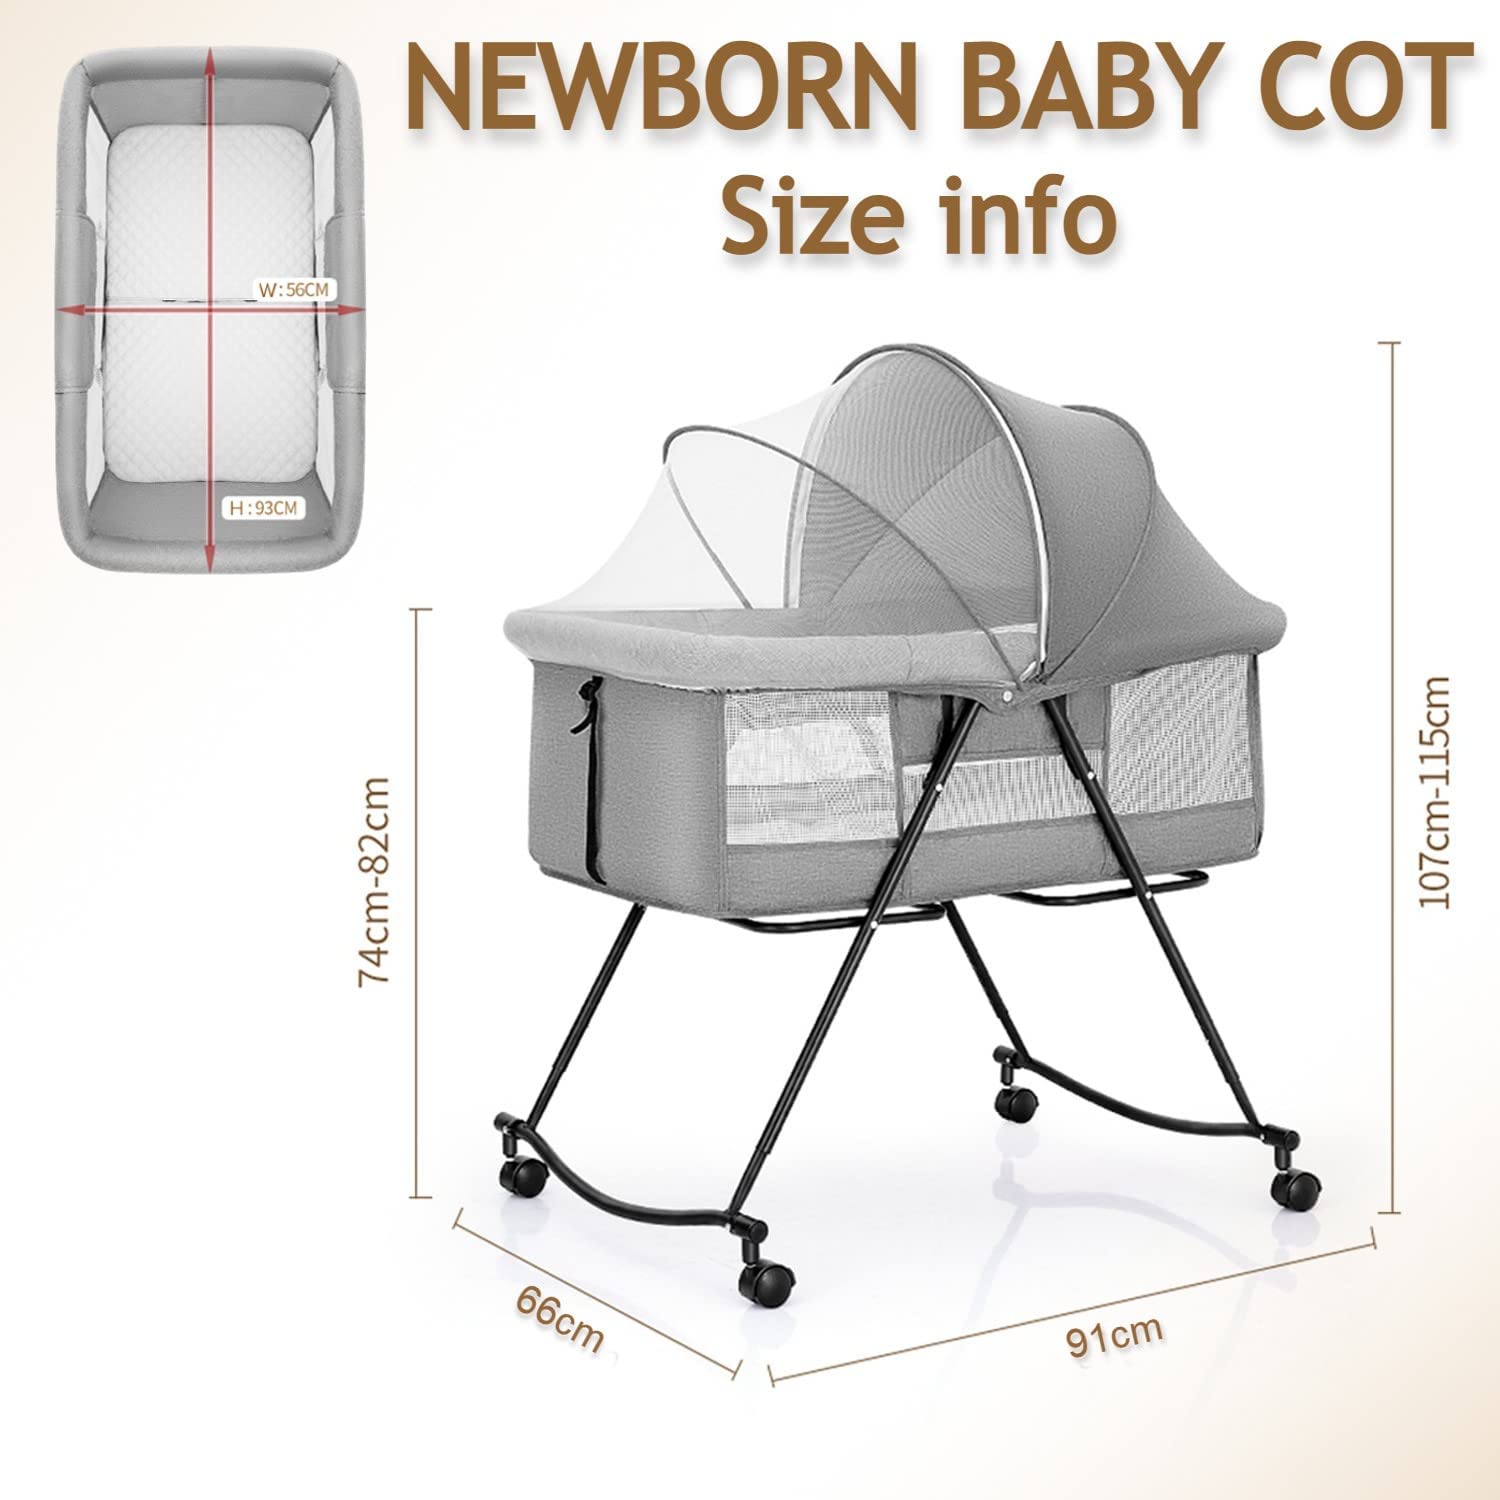 3 in 1 Portable Baby Bassinets Rocking Cradle Bed - Buy 3 in 1 Portable Baby Bassinets Rocking Cradle Bed - hocc dubai - - baby playground outdoor- Shop baby product - Shop Pet product - shop home decor and lighting